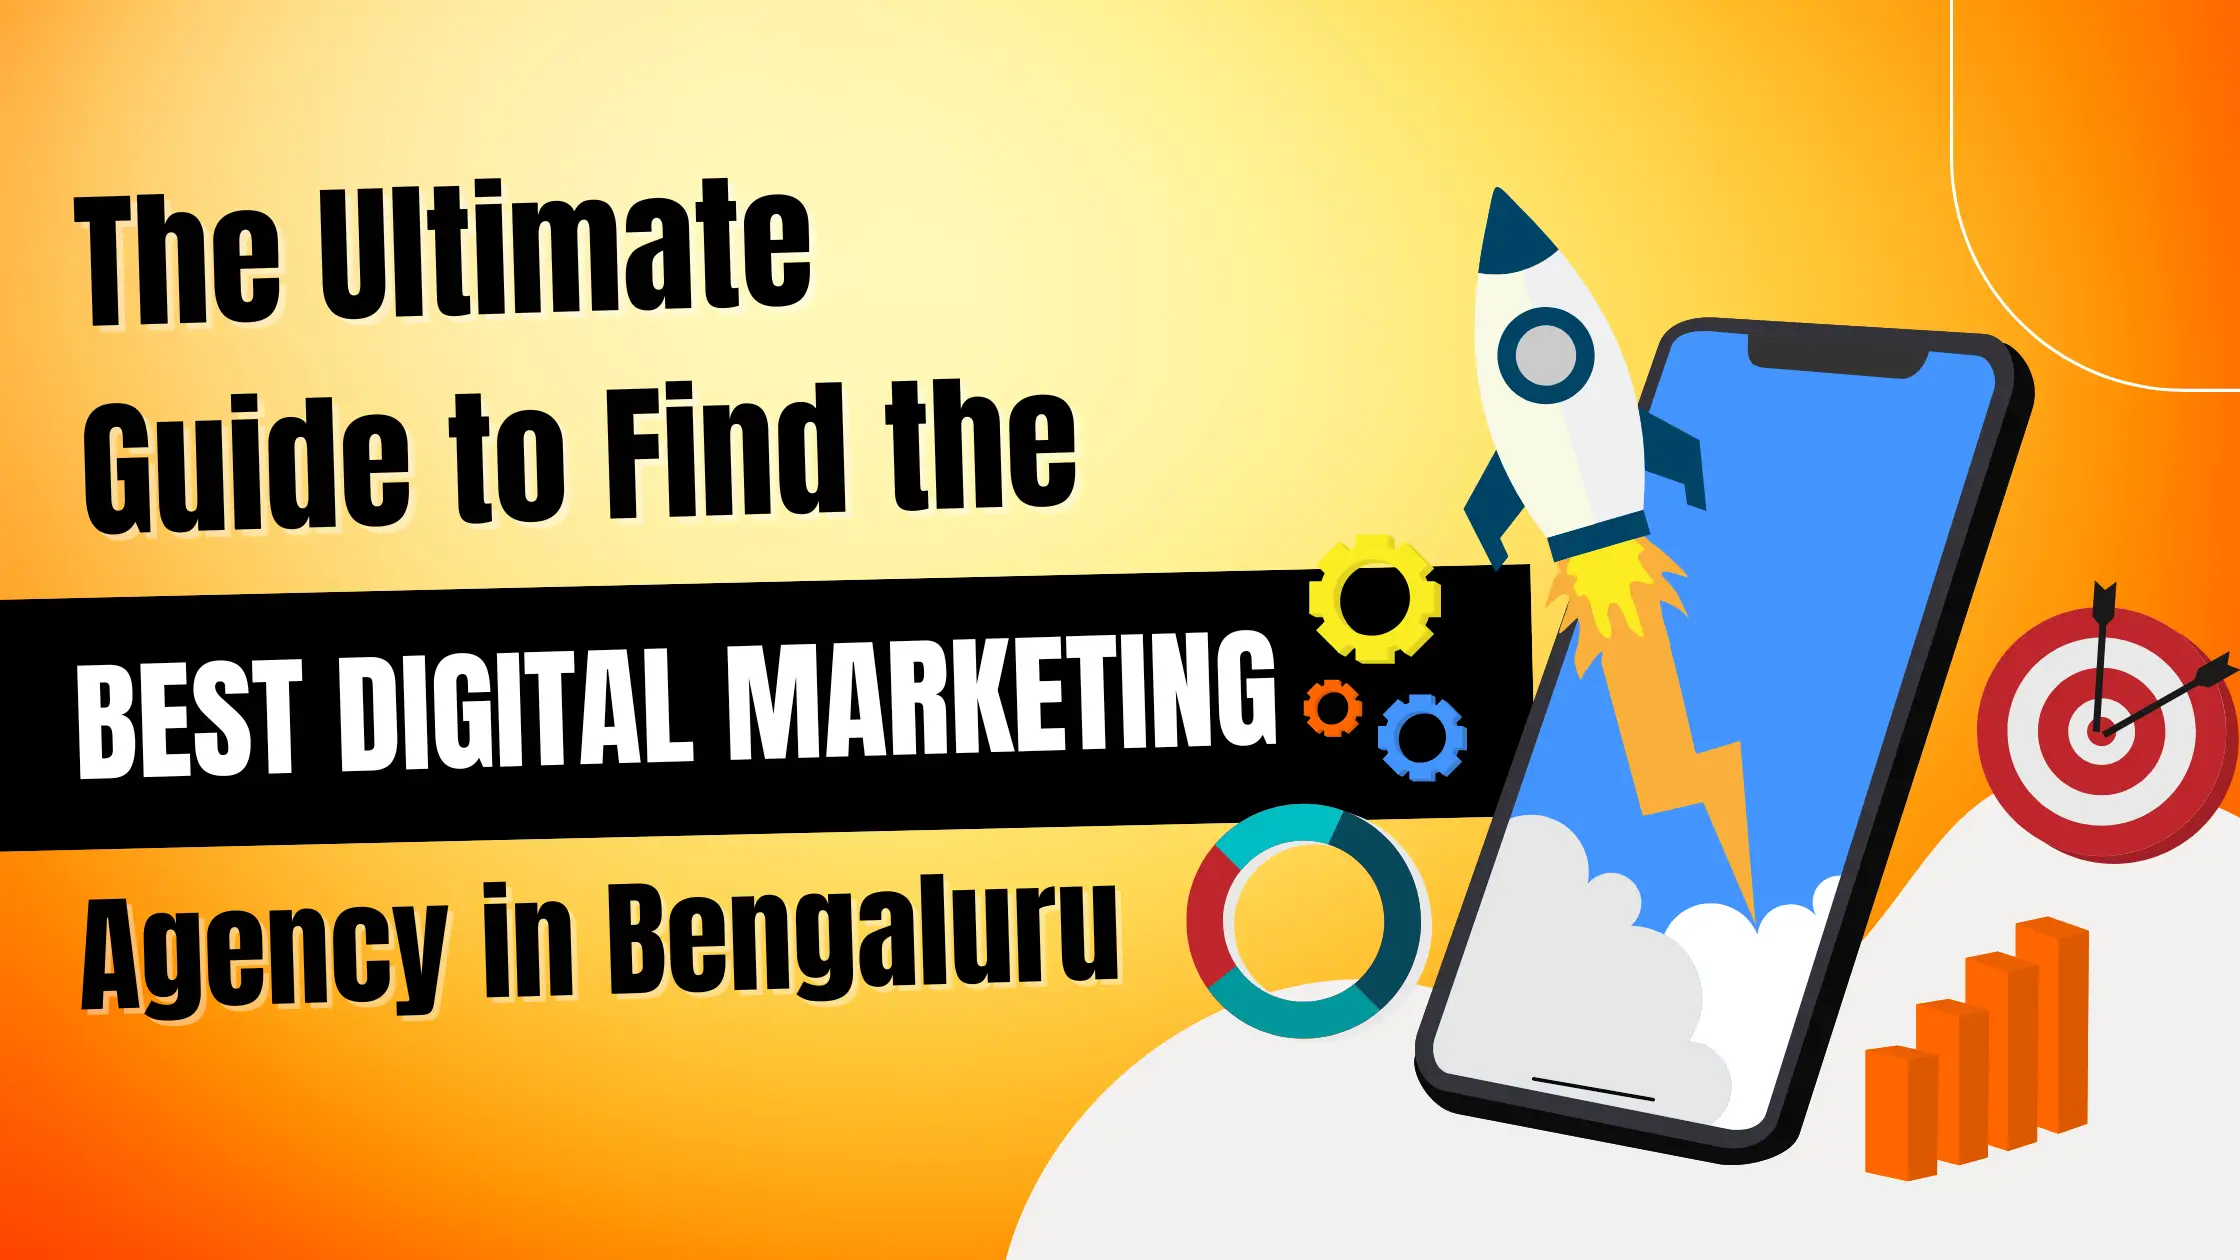 The Ultimate Guide to Find the Best Digital Marketing Agency in Bengaluru